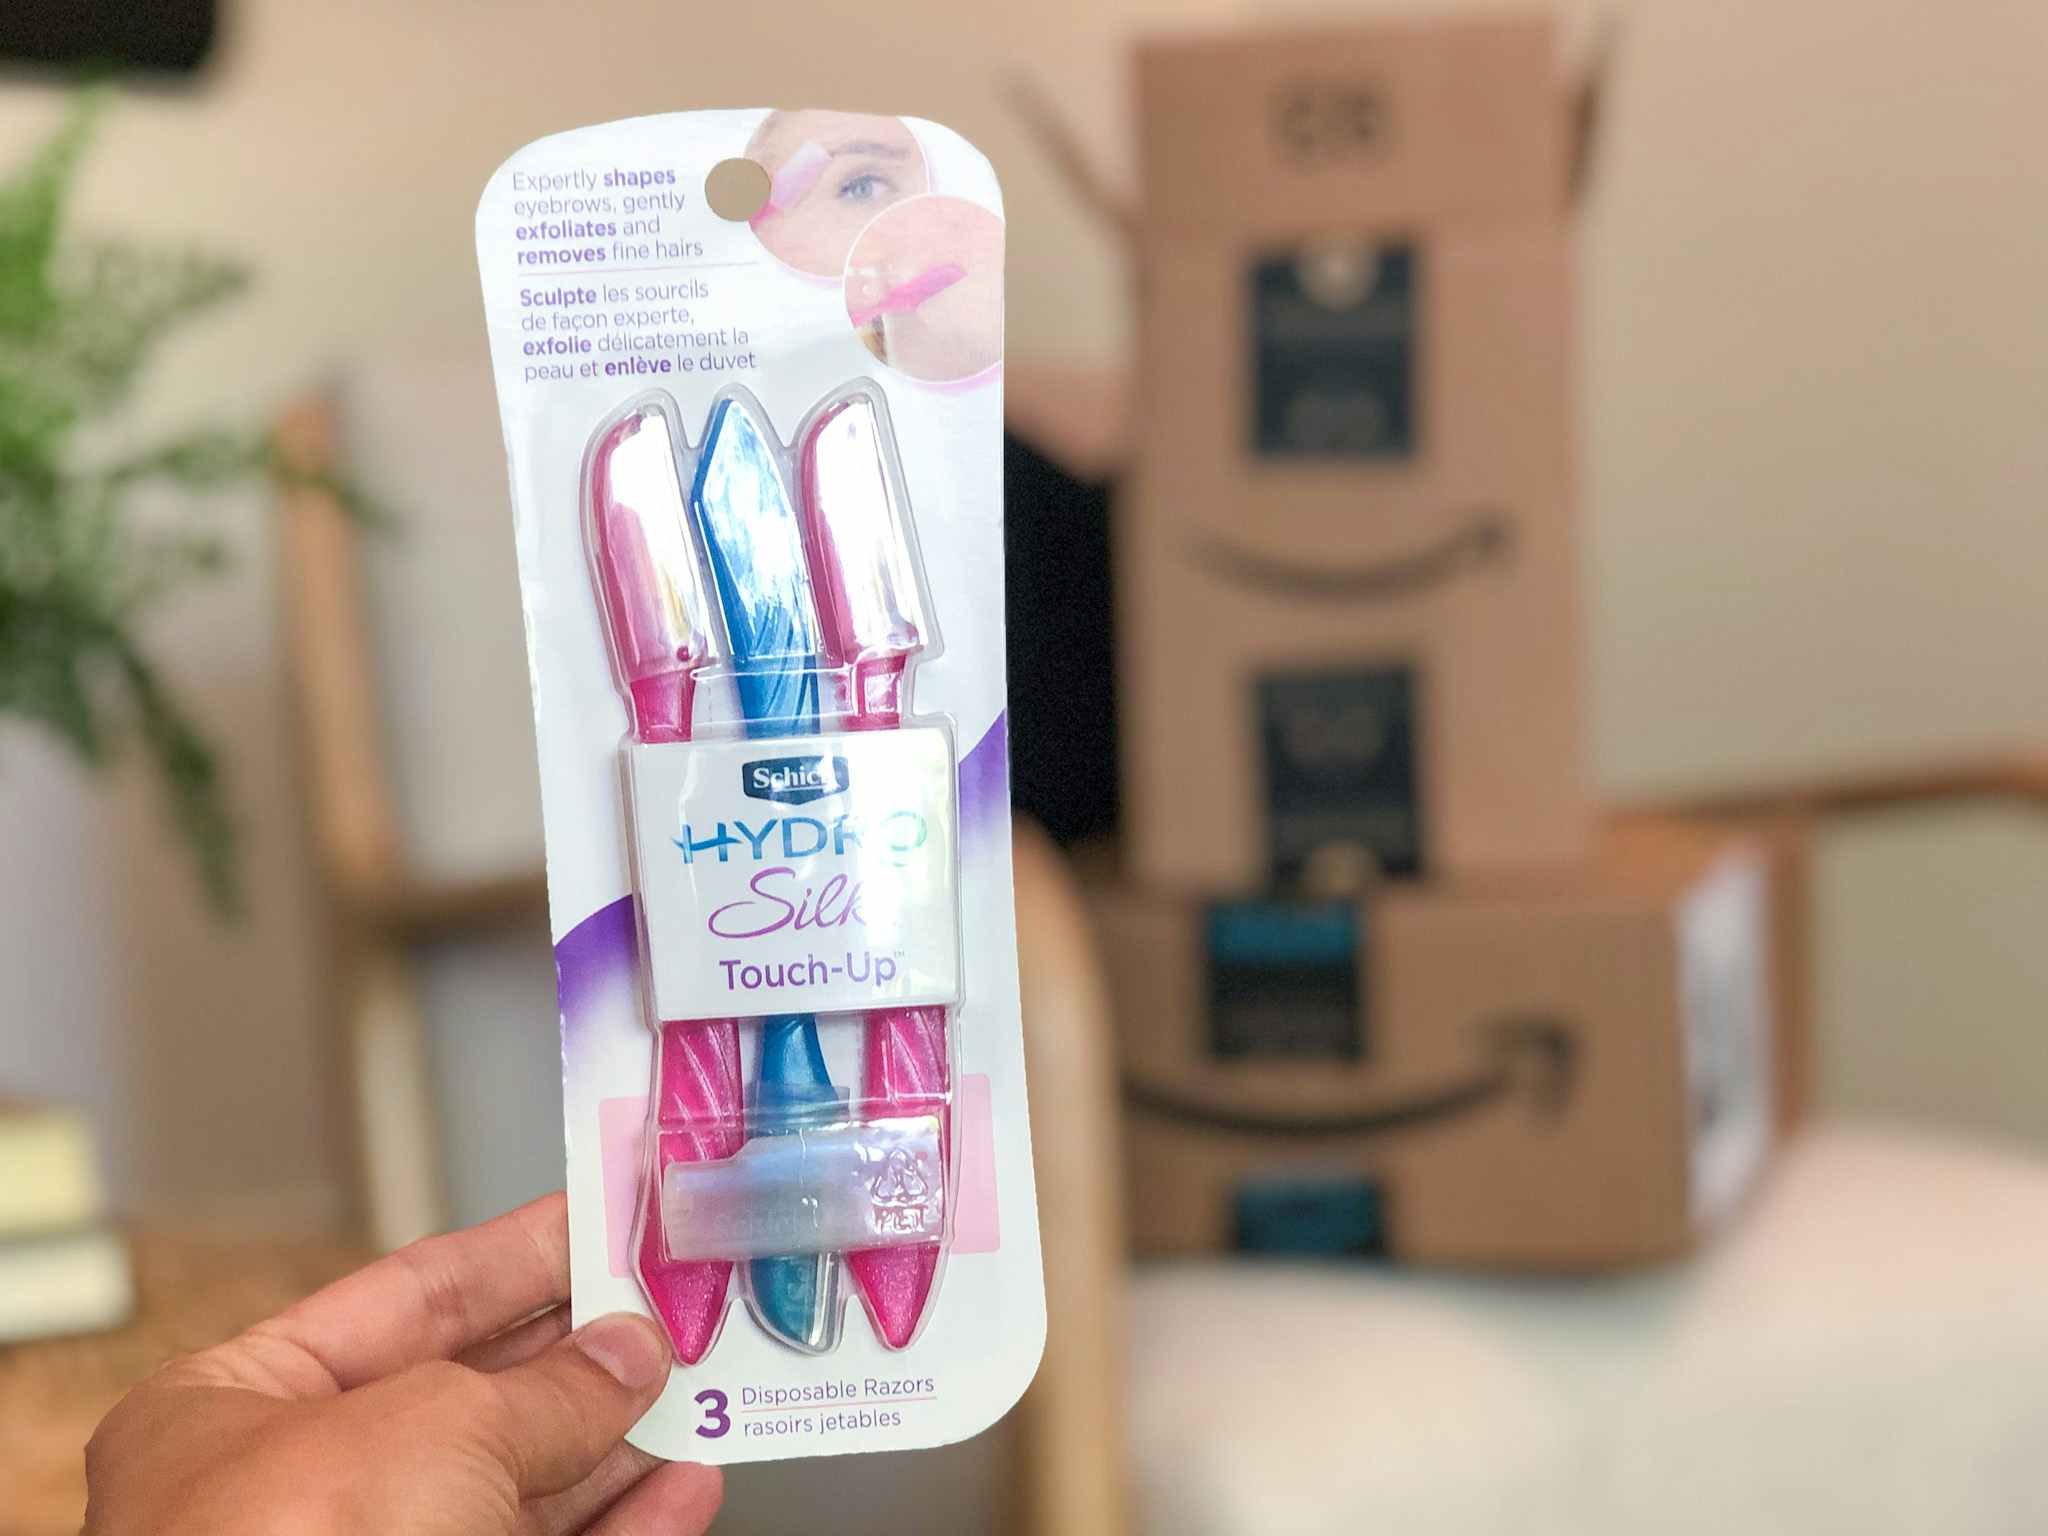 A hand holding Schick razors in front of Amazon boxes